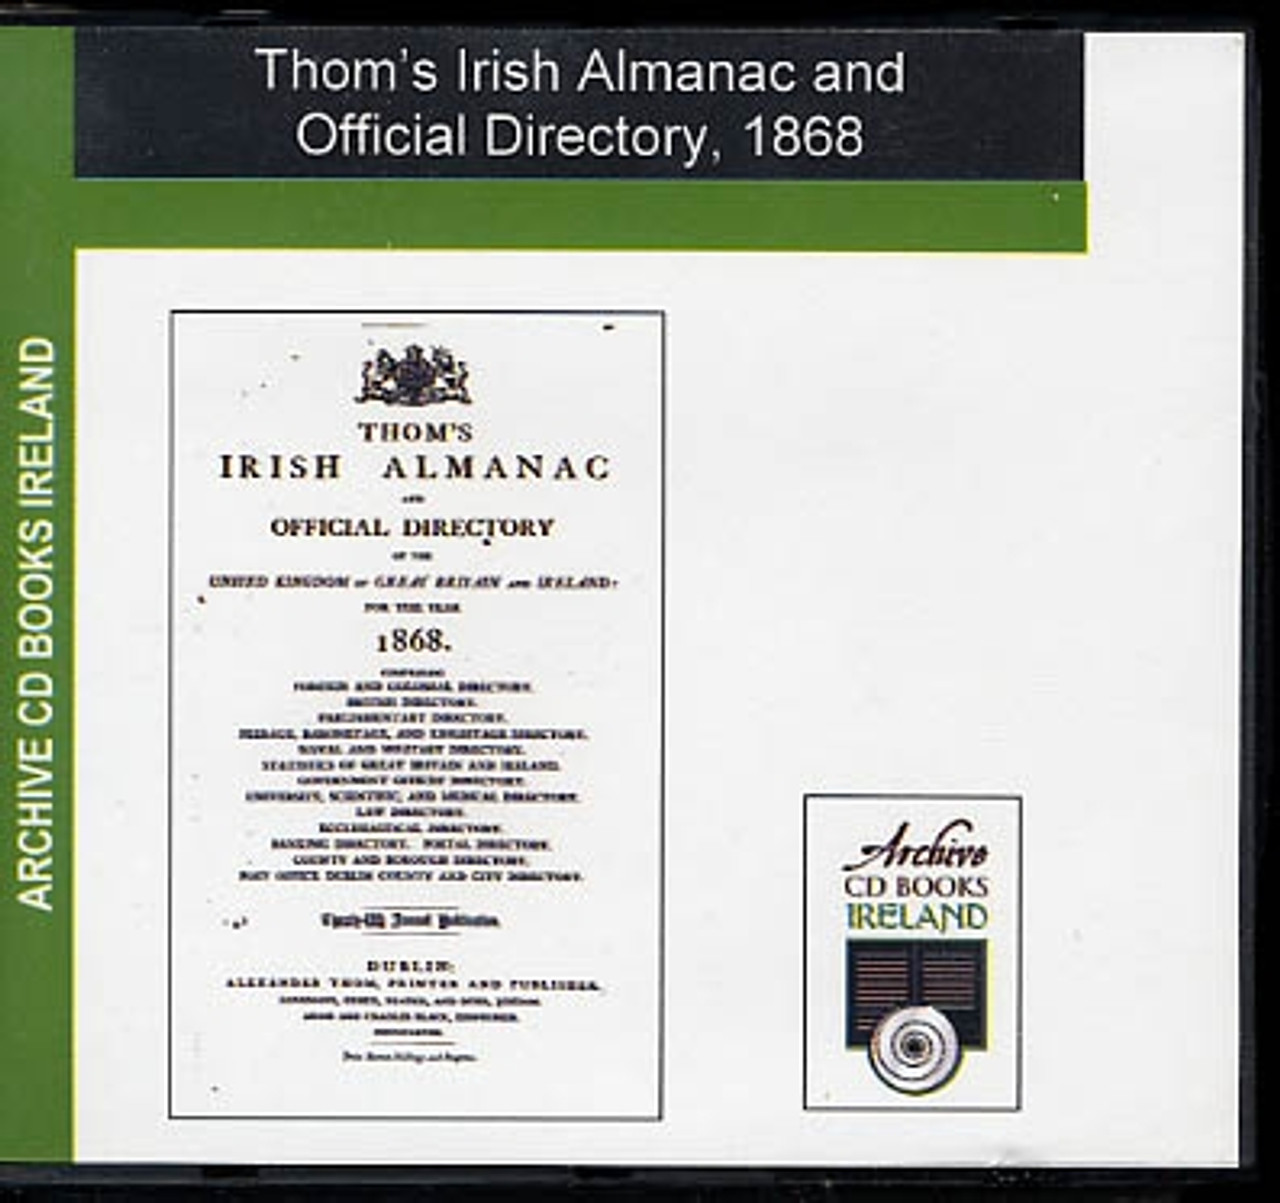 Dublin Directories and Almanacs genealogy and history in pdf ebooks on disc